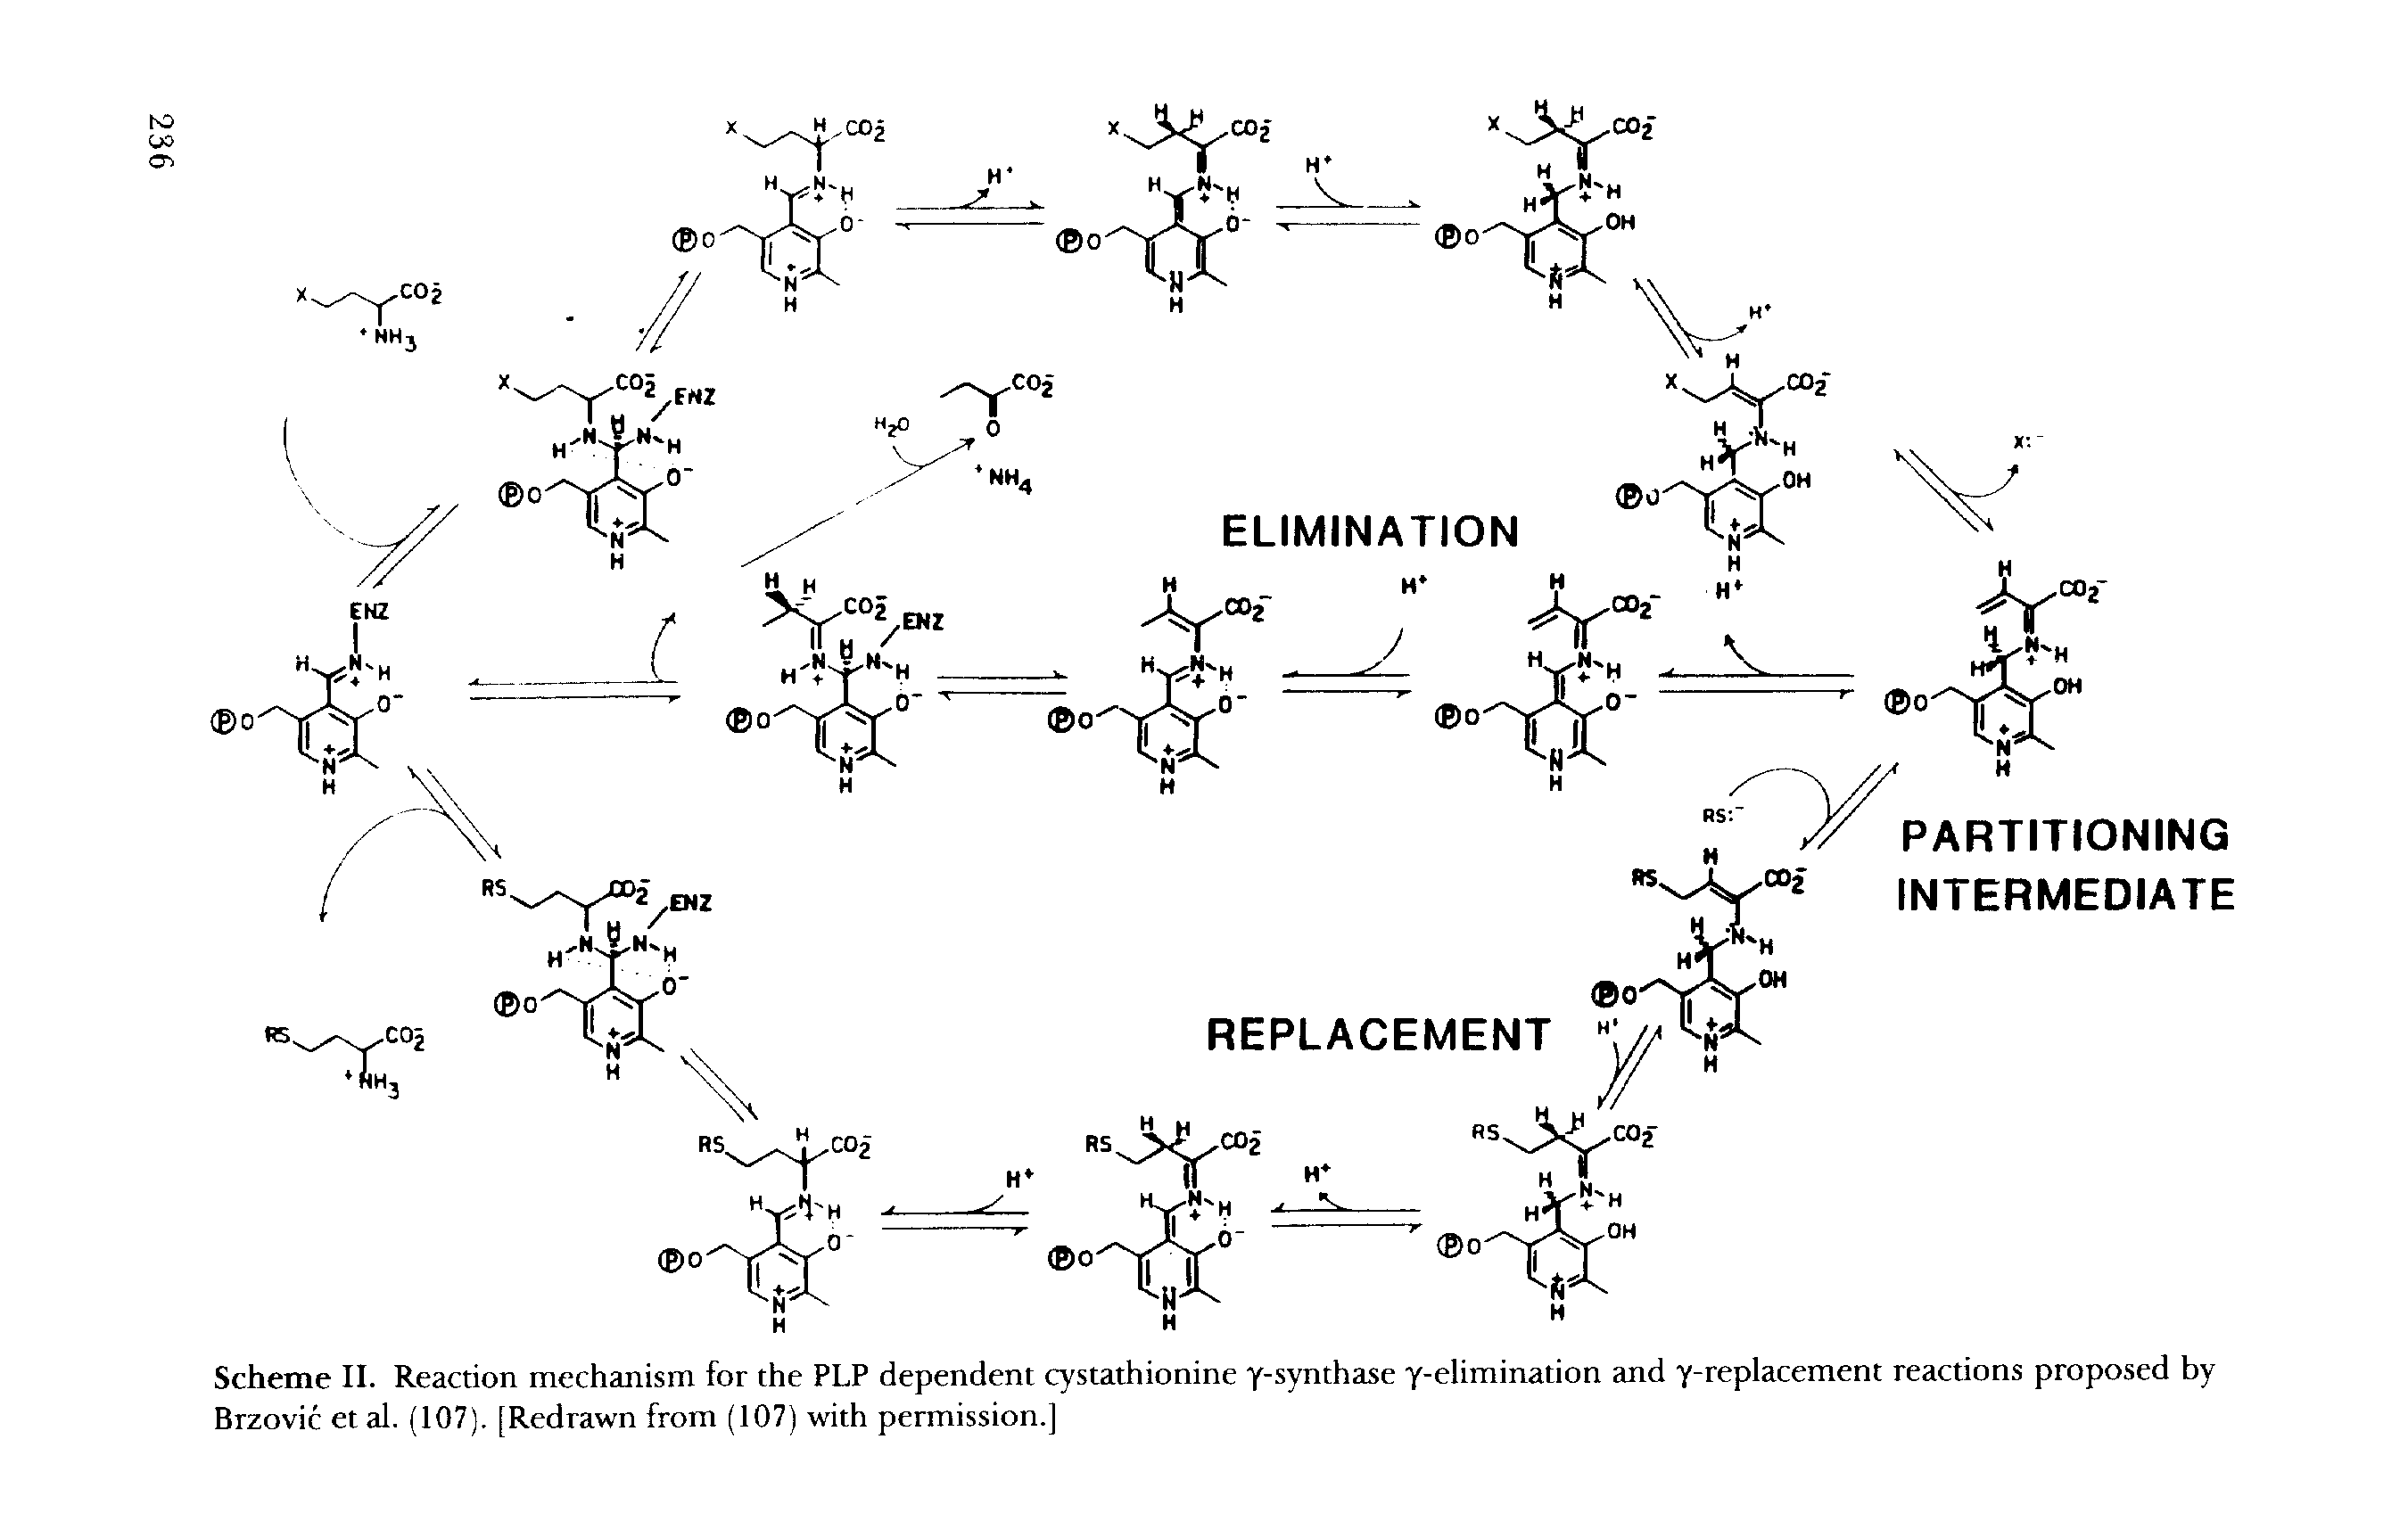 Scheme II. Reaction mechanism for the PLP dependent cystathionine y-synthase y-elimination and y-replacement reactions proposed by Brzovic etal. (107). [Redrawn from (107) with permission.]...